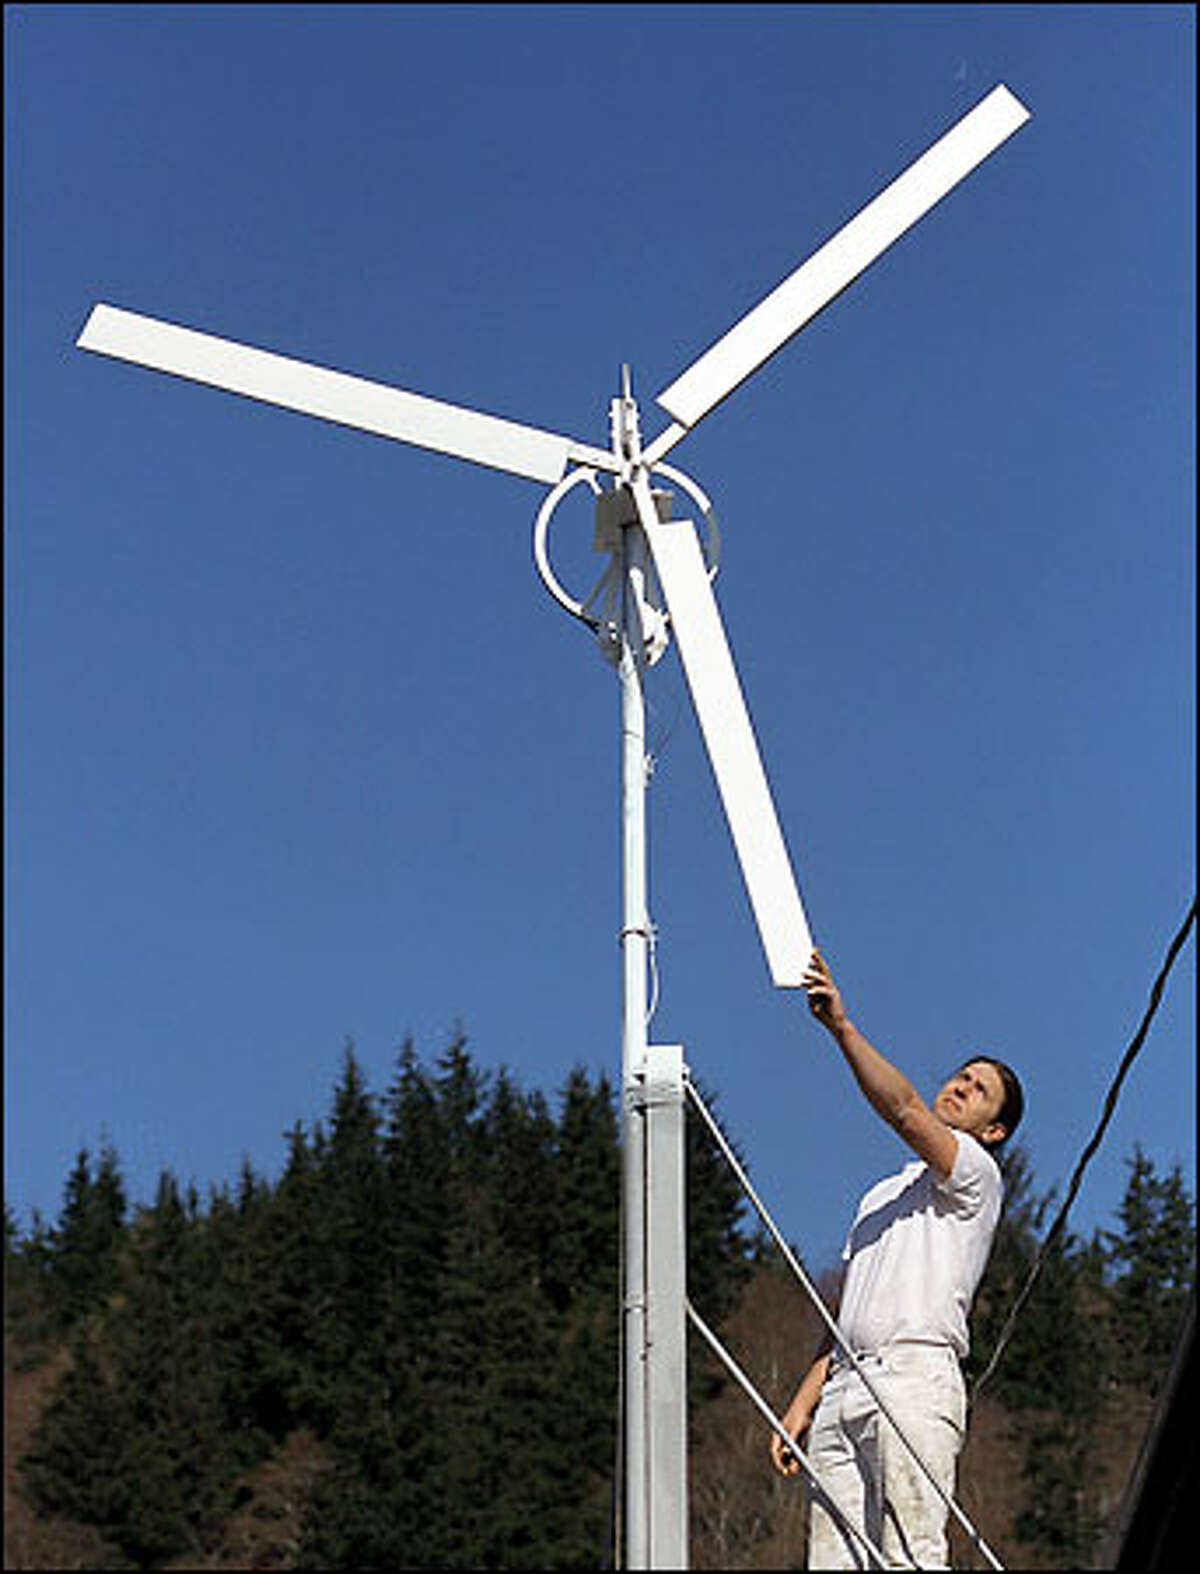 Raymond Bronk adjusts one of the four windmills that stand on his roof in Hoquiam and harness the breezes off Grays Harbor to produce electricity. More homeowners in Washington state are joining Bronk in small-scale efforts to reduce dependence on the energy grid.